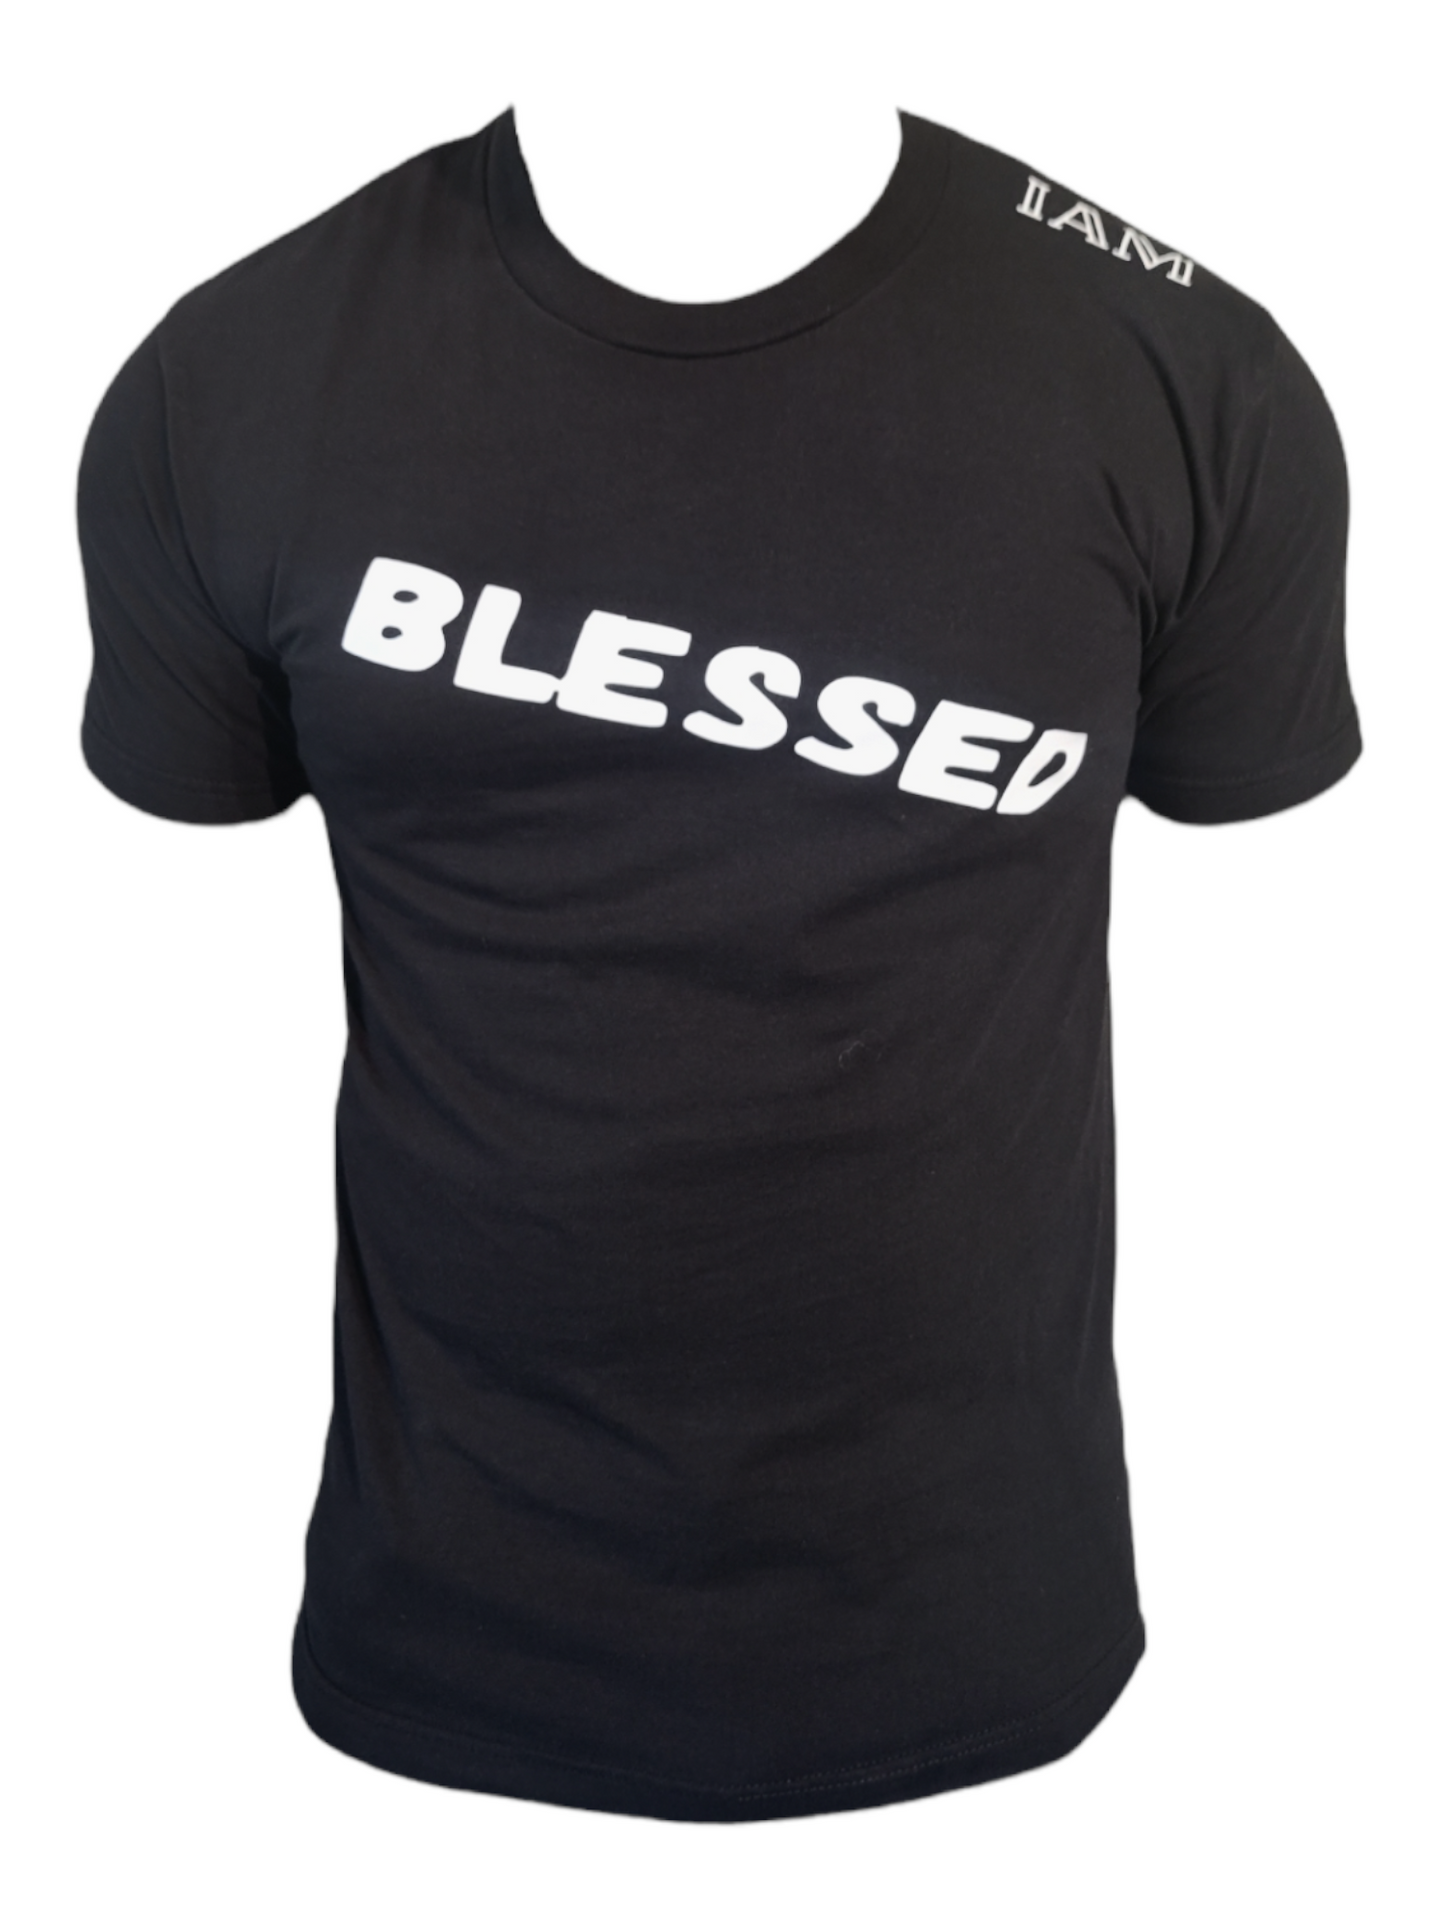 BLESSED/HIGHLY FAVORED t-shirt men